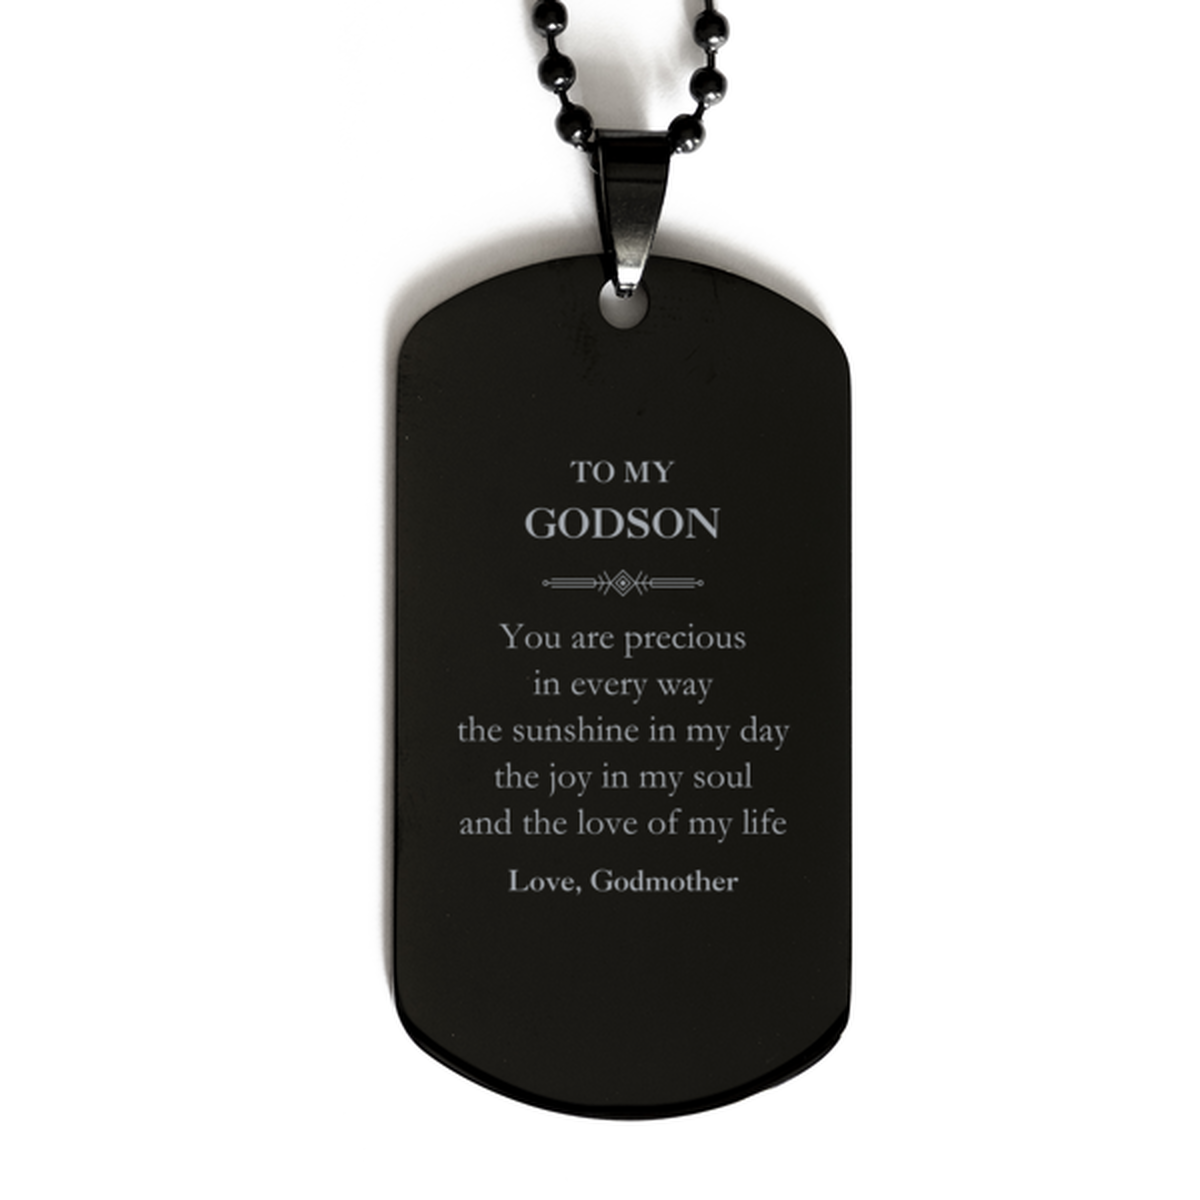 Graduation Gifts for Godson Black Dog Tag Present from Godmother, Christmas Godson Birthday Gifts Godson You are precious in every way the sunshine in my day. Love, Godmother